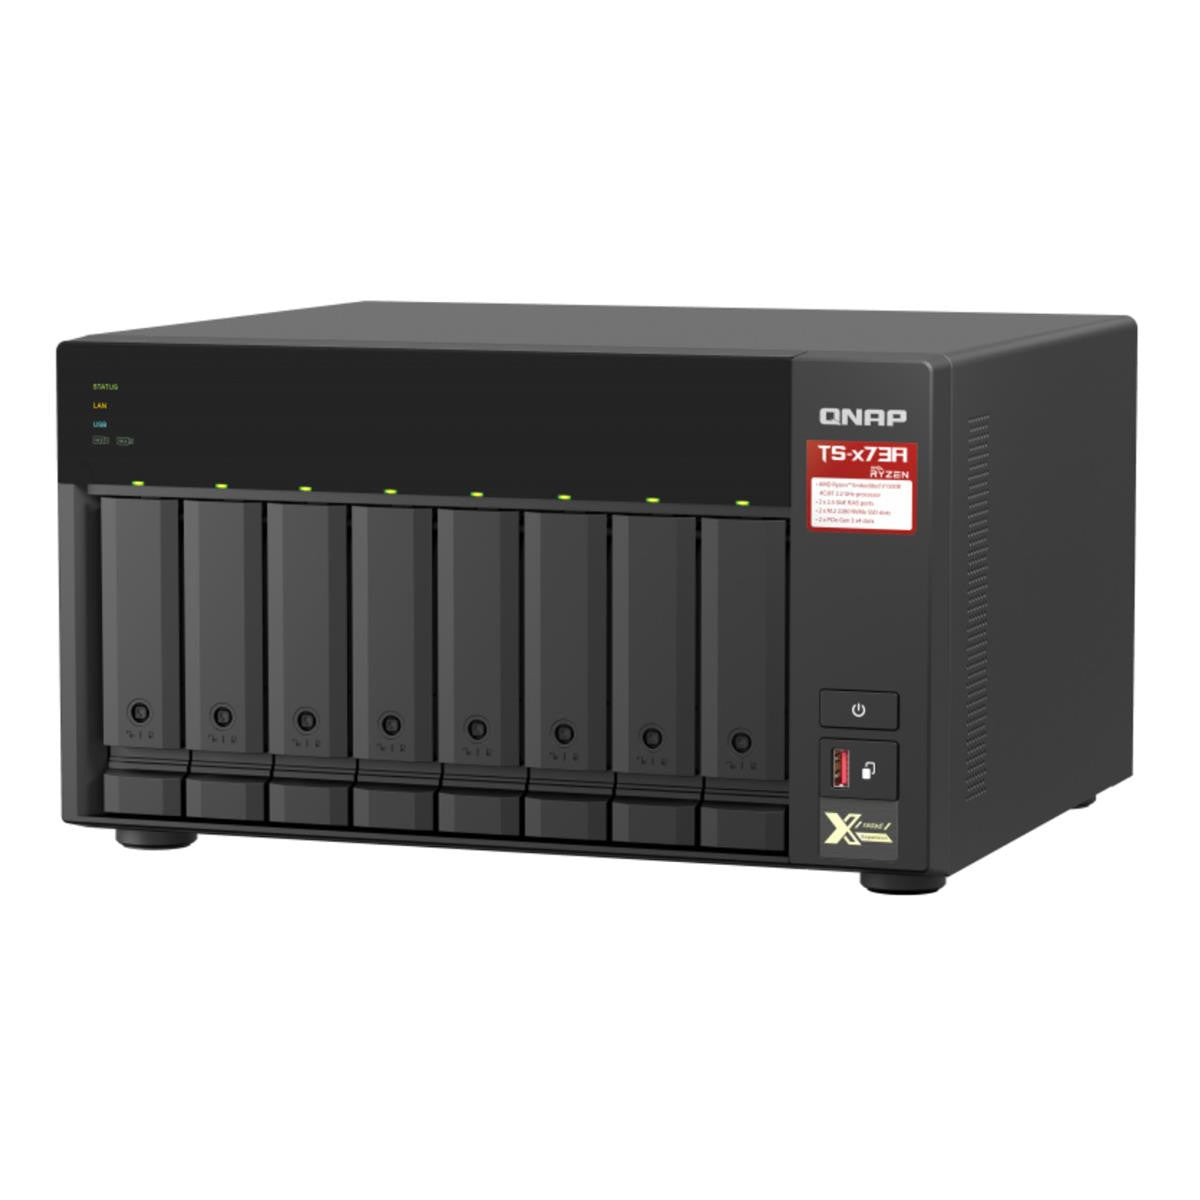 QNAP TS-873A 8-BAY NAS with 16GB DDR4 RAM and 64TB (8x8TB) Seagate Ironwolf NAS Drives Fully Assembled and Tested